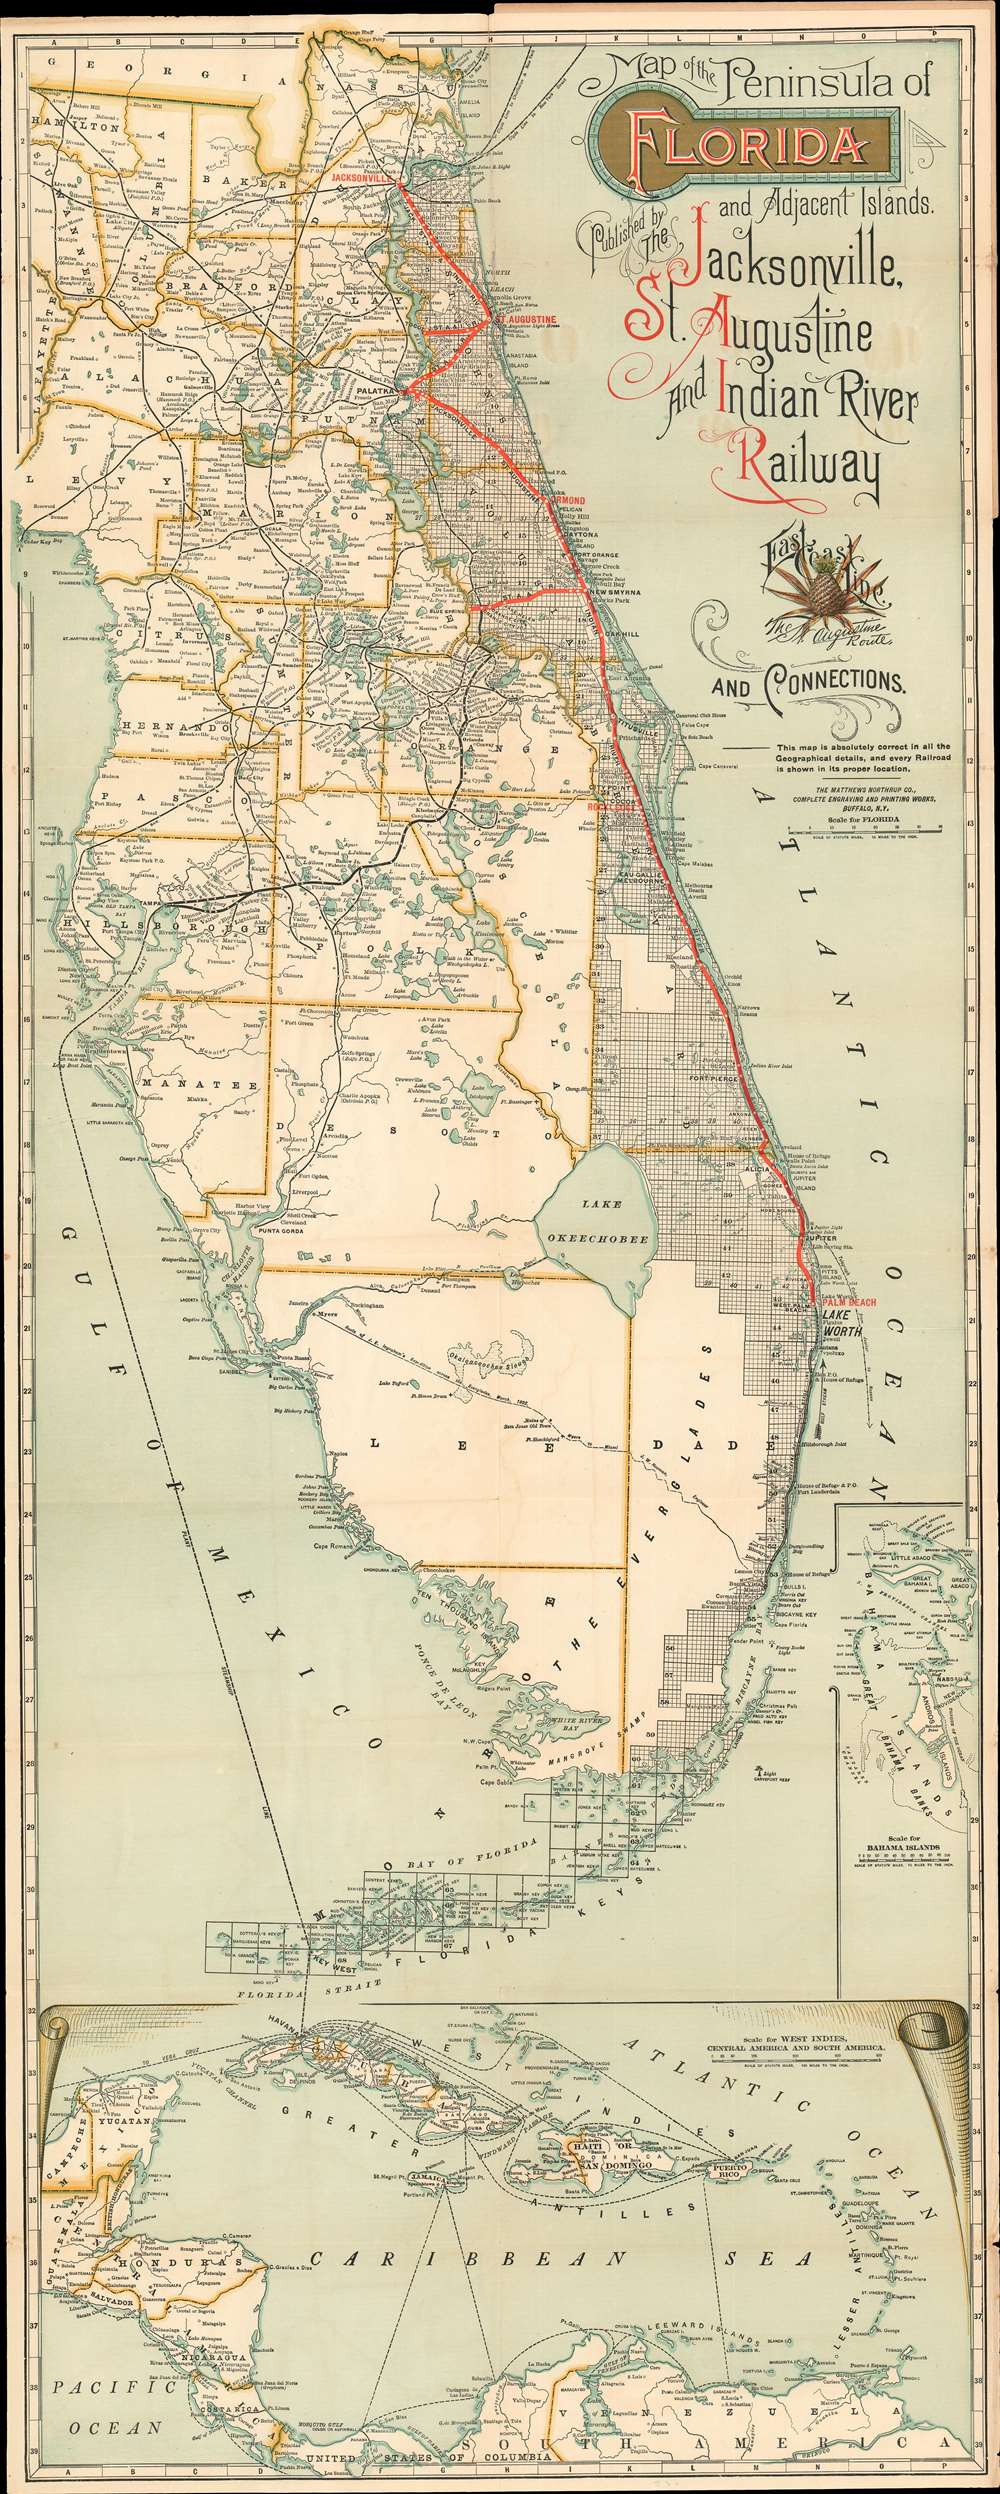 Map of the Peninsula of Florida and Adjacent Islands Published by the Jacksonville, St. Augustine and Indian River Railway. - Main View